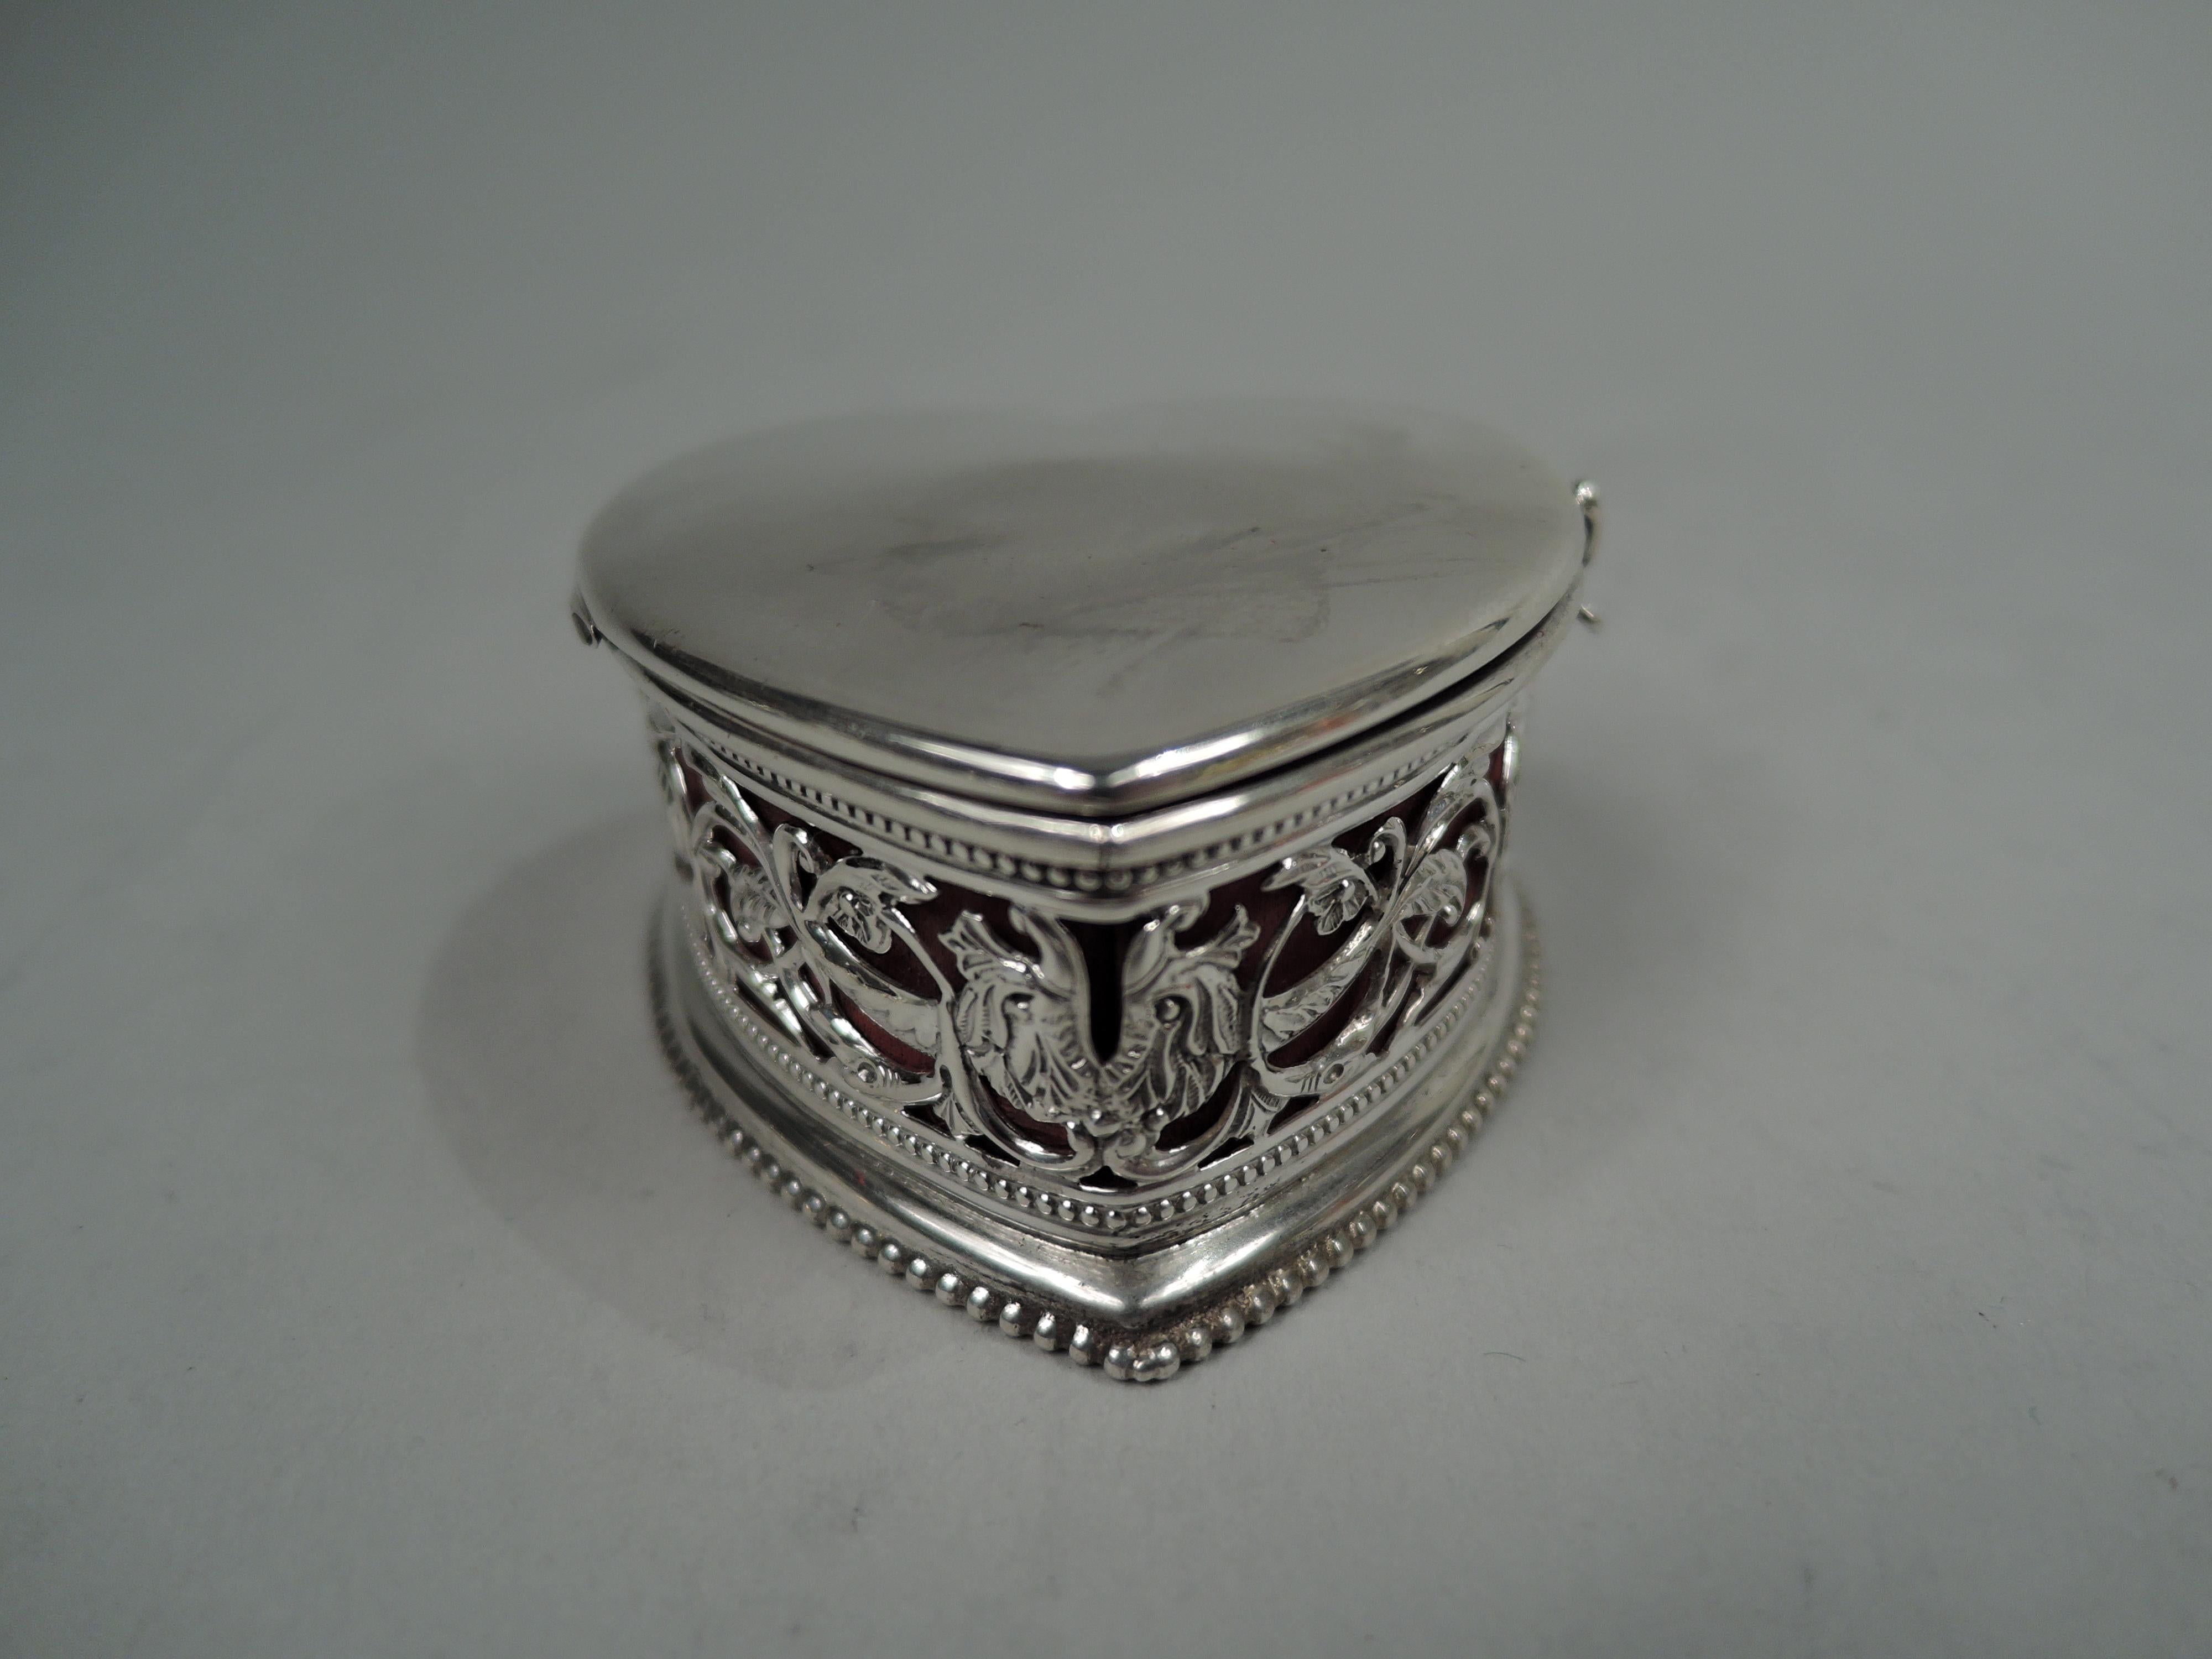 Edwardian Classical sterling silver ring box. Theodore W. Foster & Bro. in Providence, ca 1910. Heart shaped with open leafing scroll sides. Beading. Cover side-hinged and flat with room for engraving. Interior lined with red silk. Fully marked